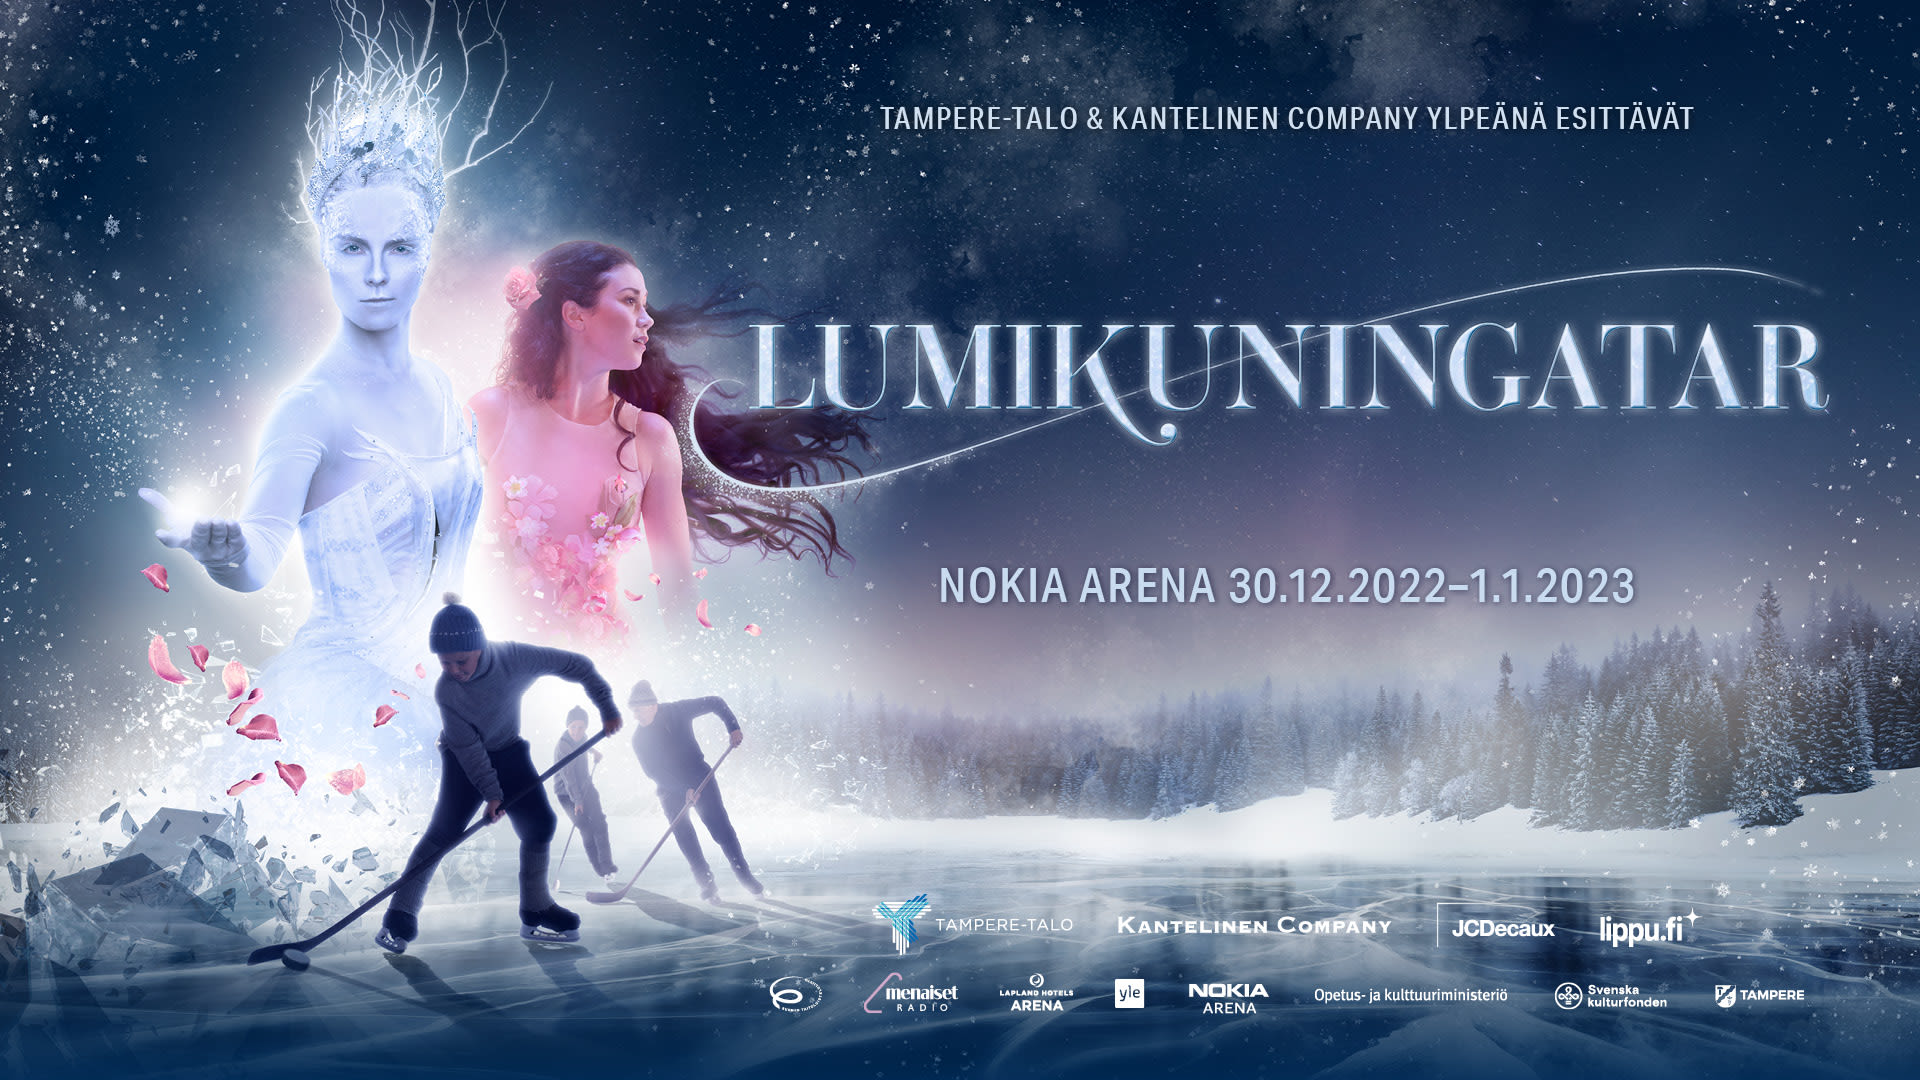 The new Finnish ice ballet extravaganza The Snow Queen is based on the magical fairytale by H. C. Andersen.